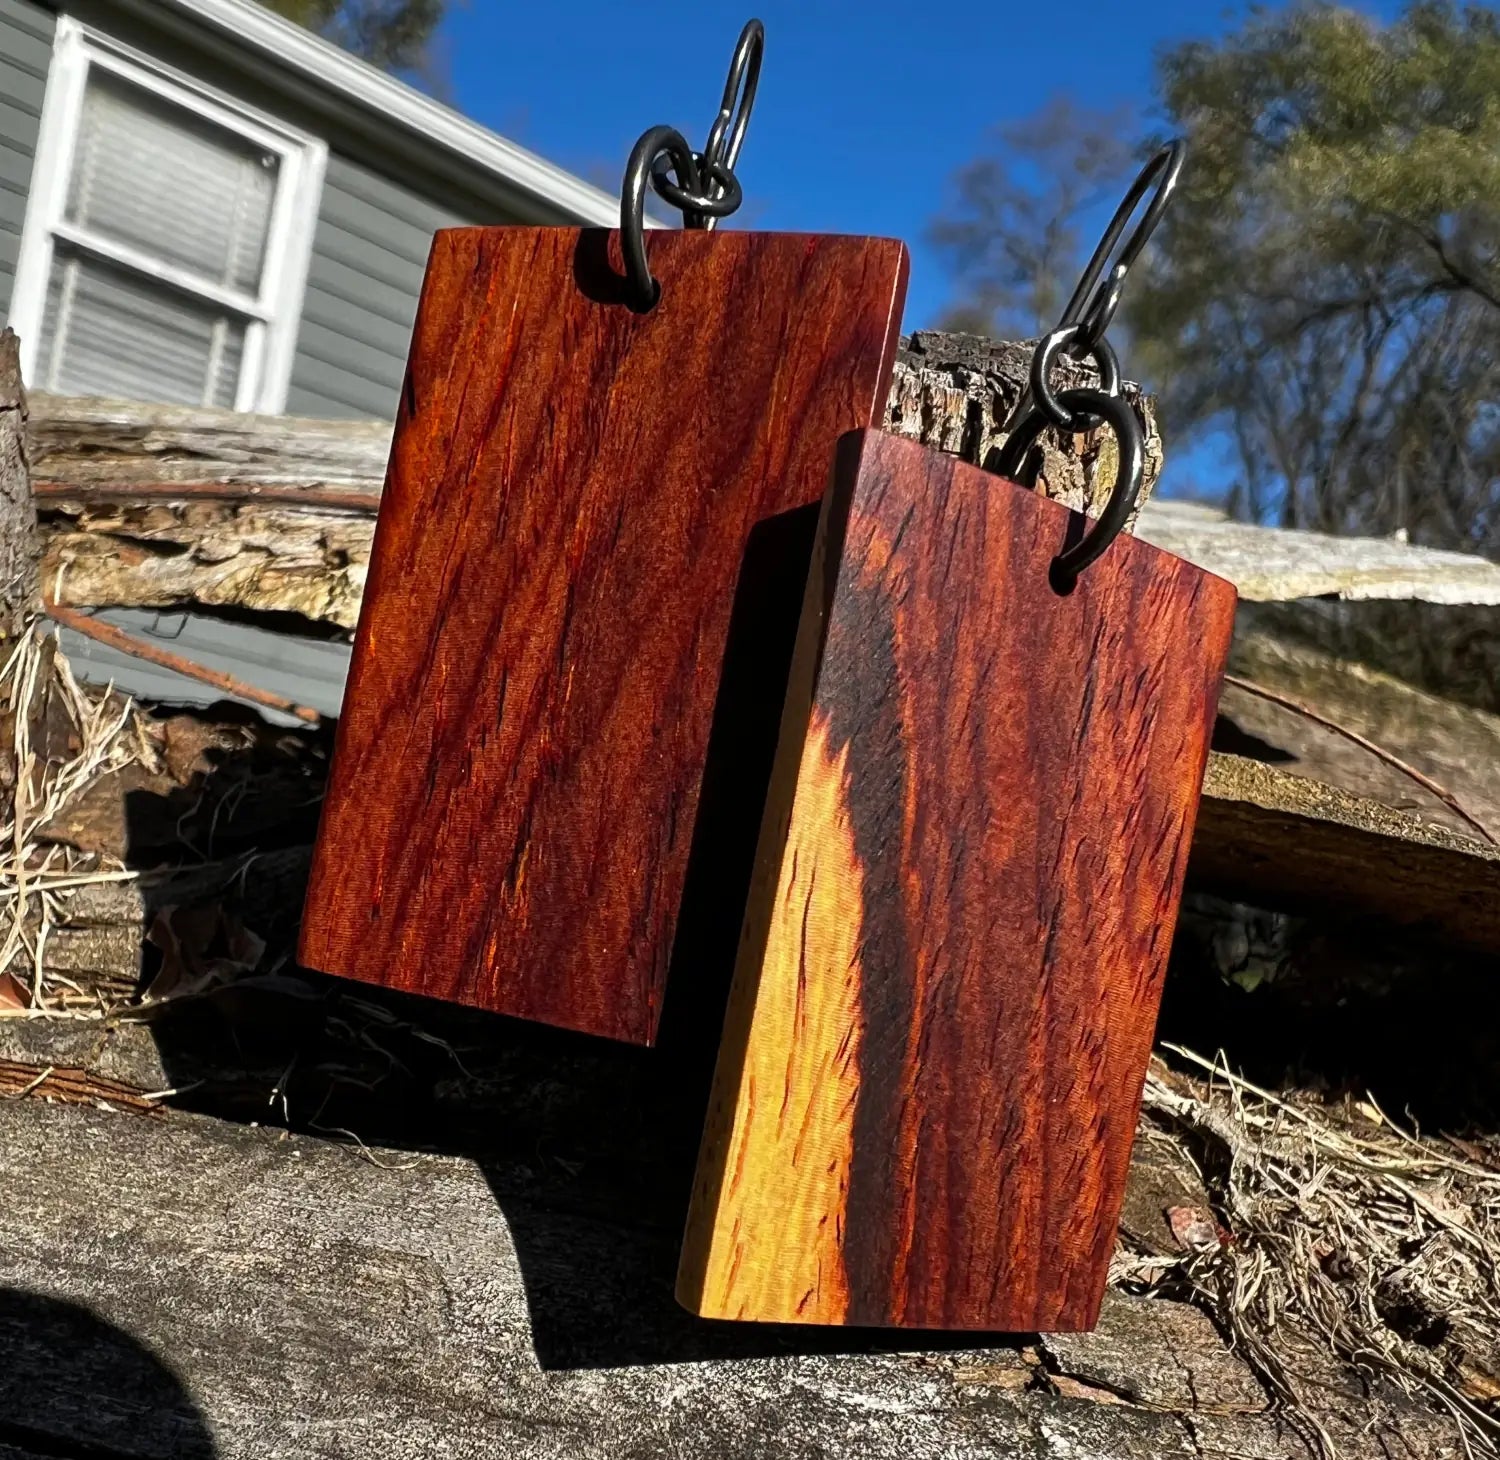 Cocobolo earrings displayed on a old log